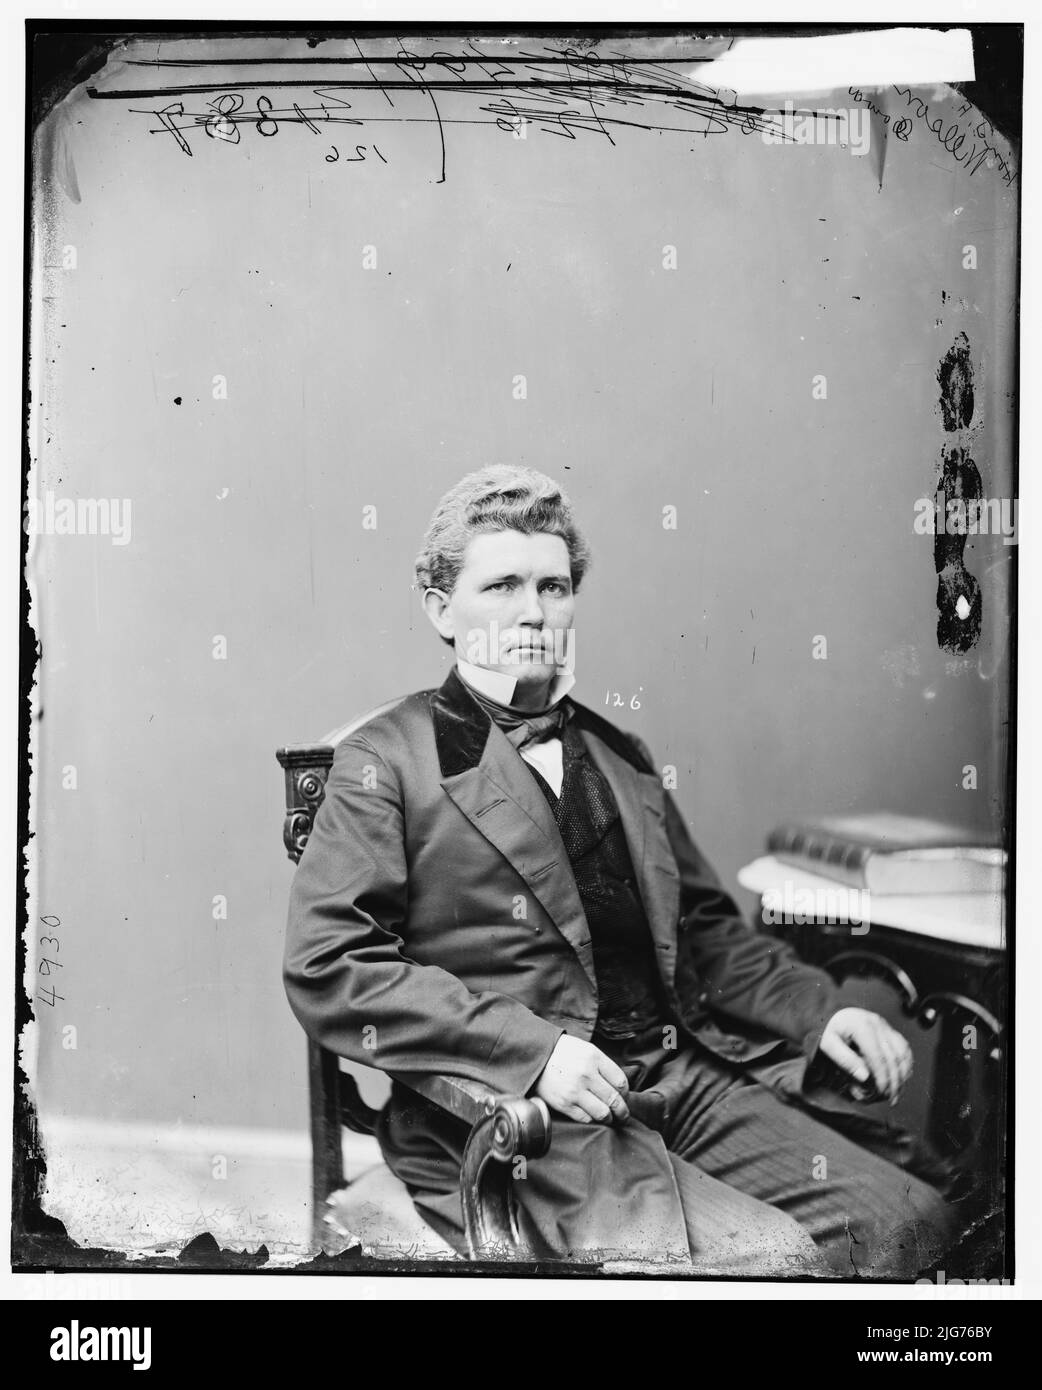 Wilson, Hon. James Falconer of Iowa, between 1865 and 1880. Delegate to Democratic Nat. Convention in Baltimore in 1860. [Lawyer and politician]. Stock Photo